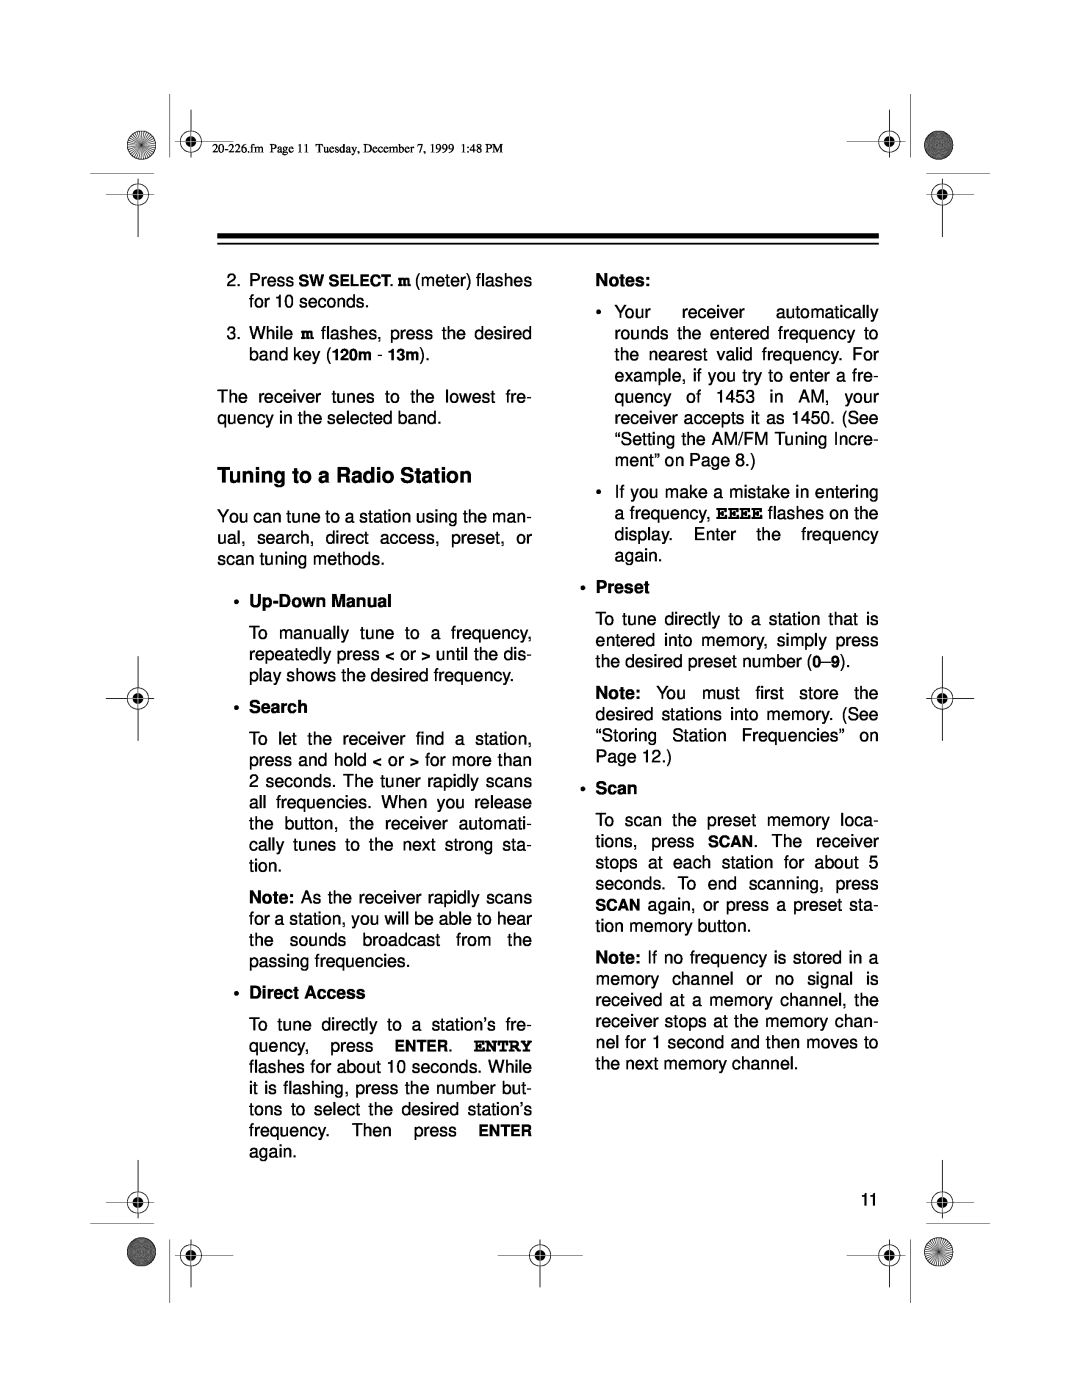 Radio Shack DX-396 owner manual Tuning to a Radio Station, •Up-DownManual, •Search, •Direct Access, Notes, Preset, •Scan 